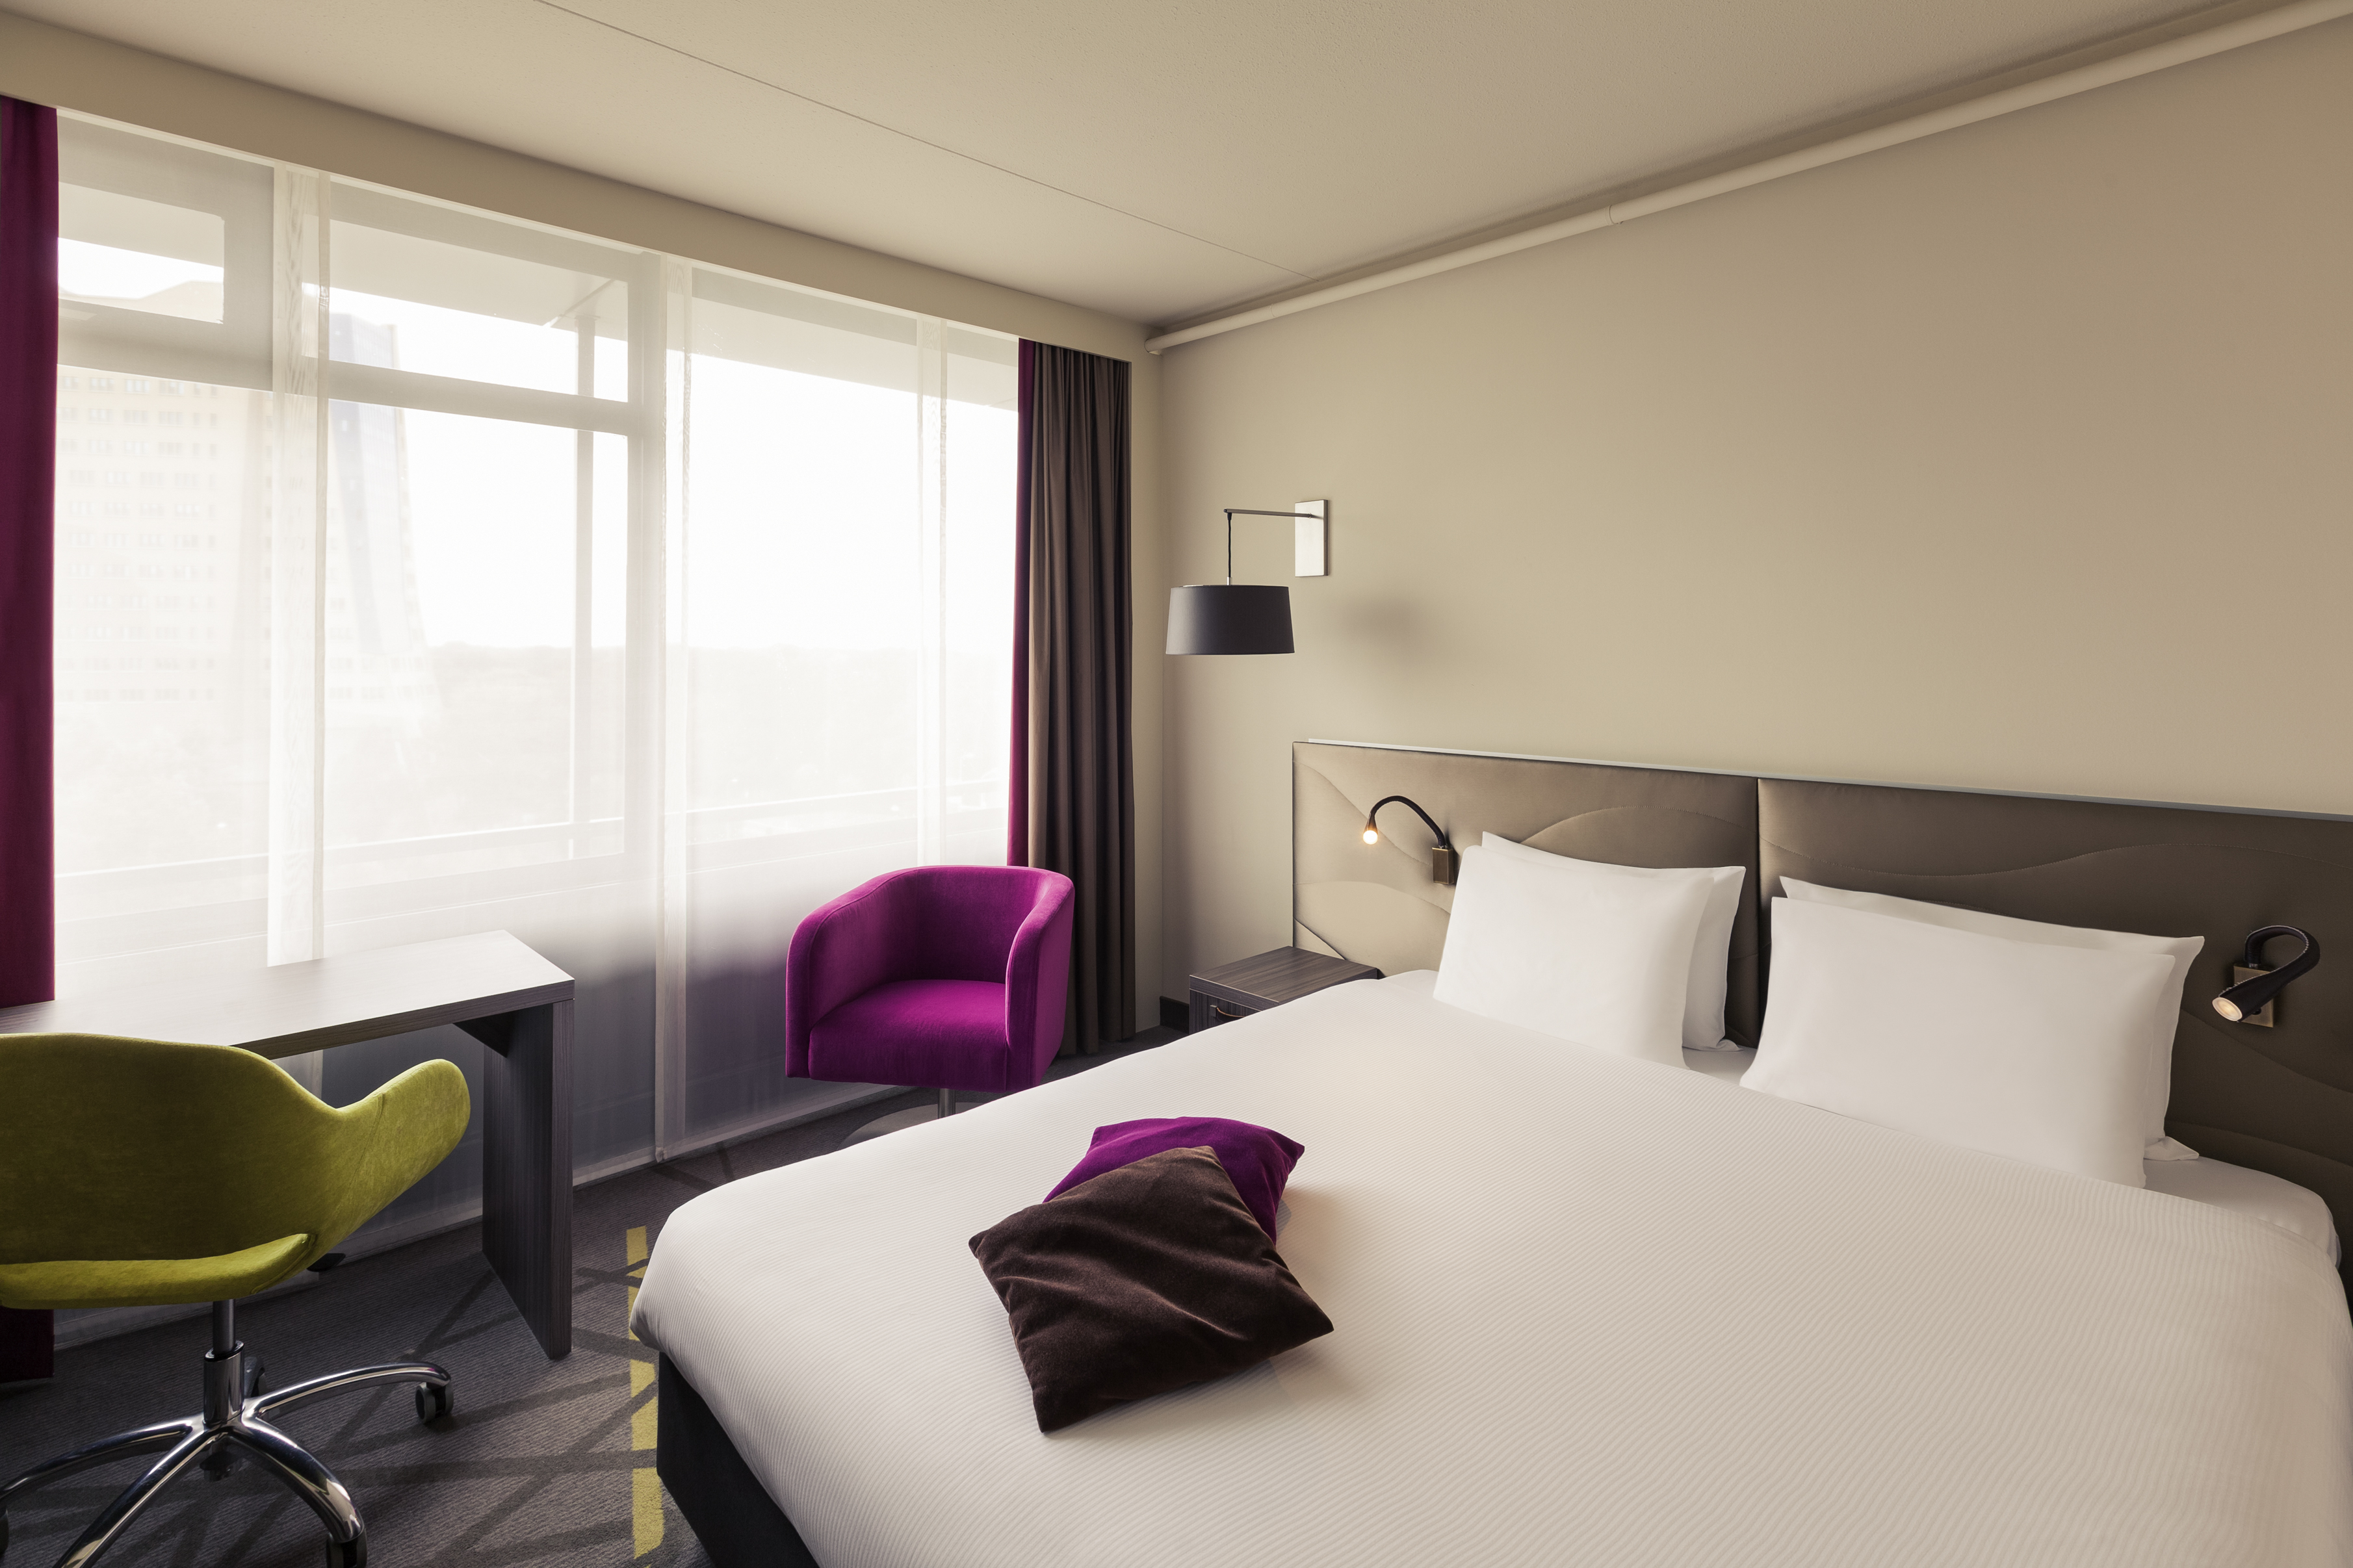 Mercure Groningen Martiniplaza <br/>73.87 ew <br/> <a href='http://vakantieoplossing.nl/outpage/?id=de4c168bc484eb267fd35ef92041538c' target='_blank'>View Details</a>